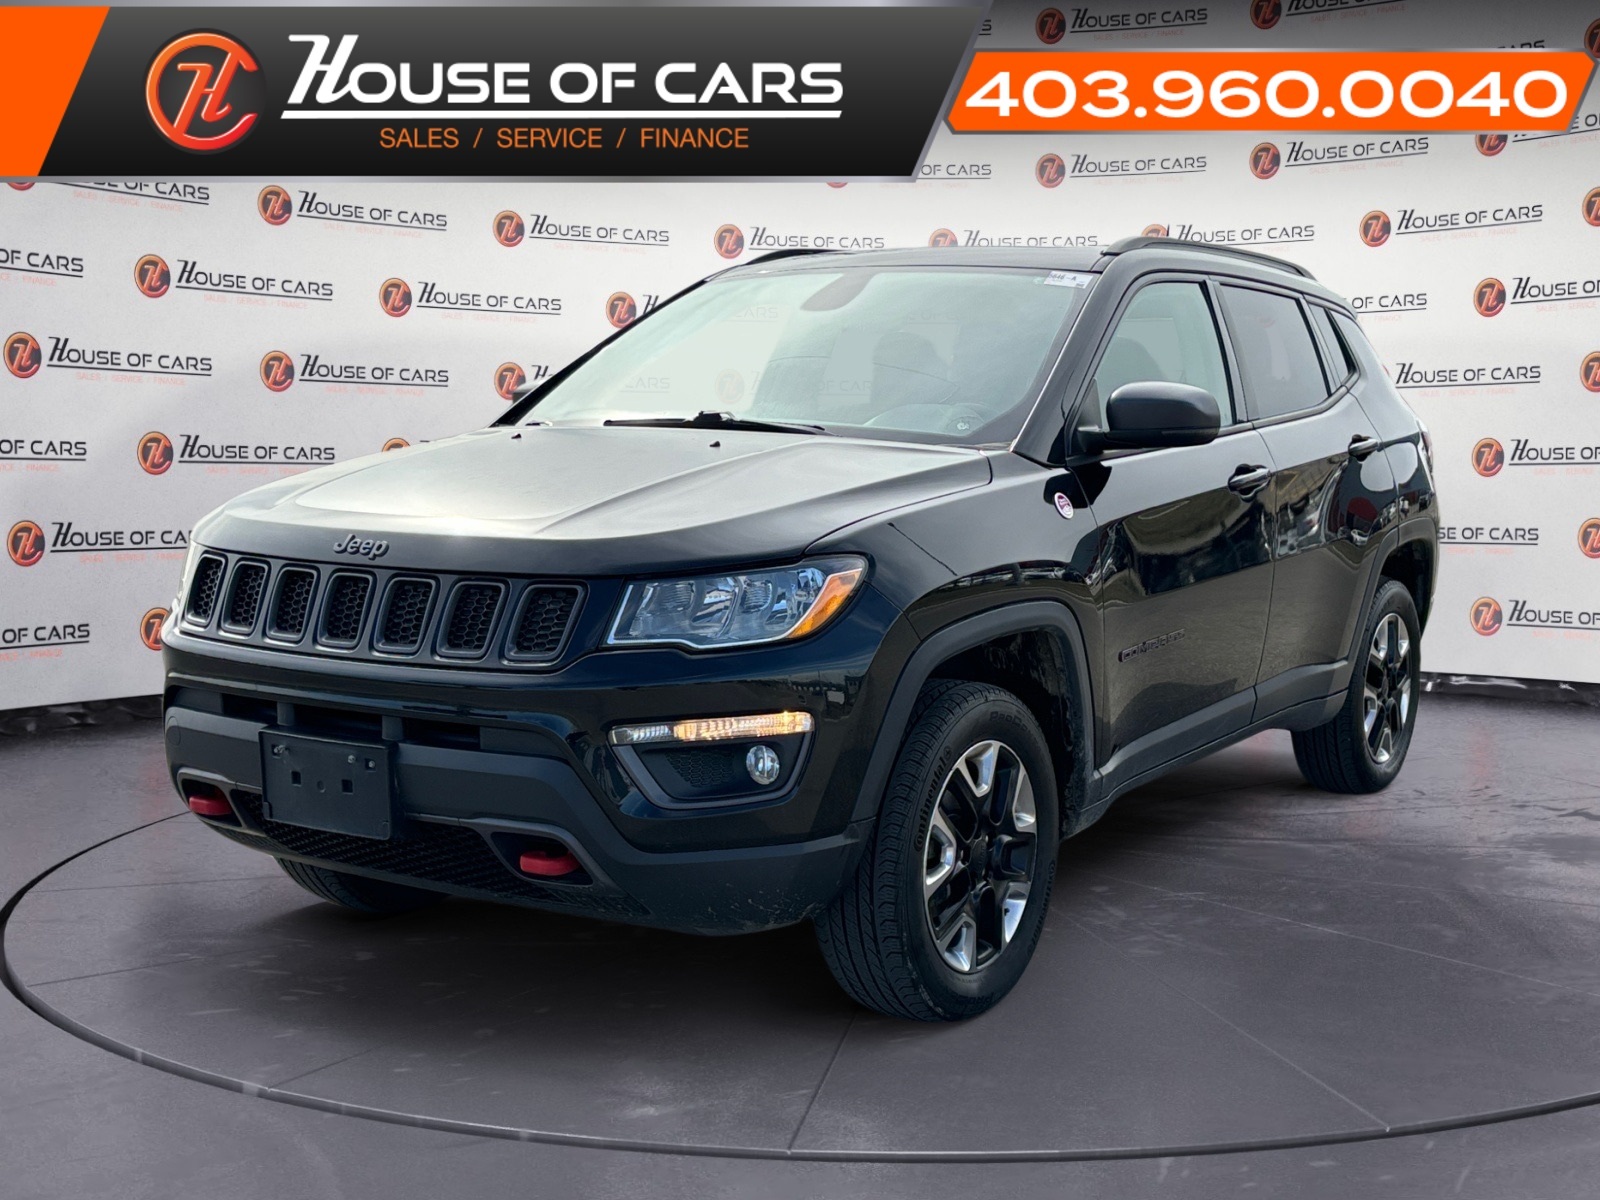 2017 Jeep Compass 4WD 4dr Trailhawk/ Heated Seats/ Panoramic Sunroof